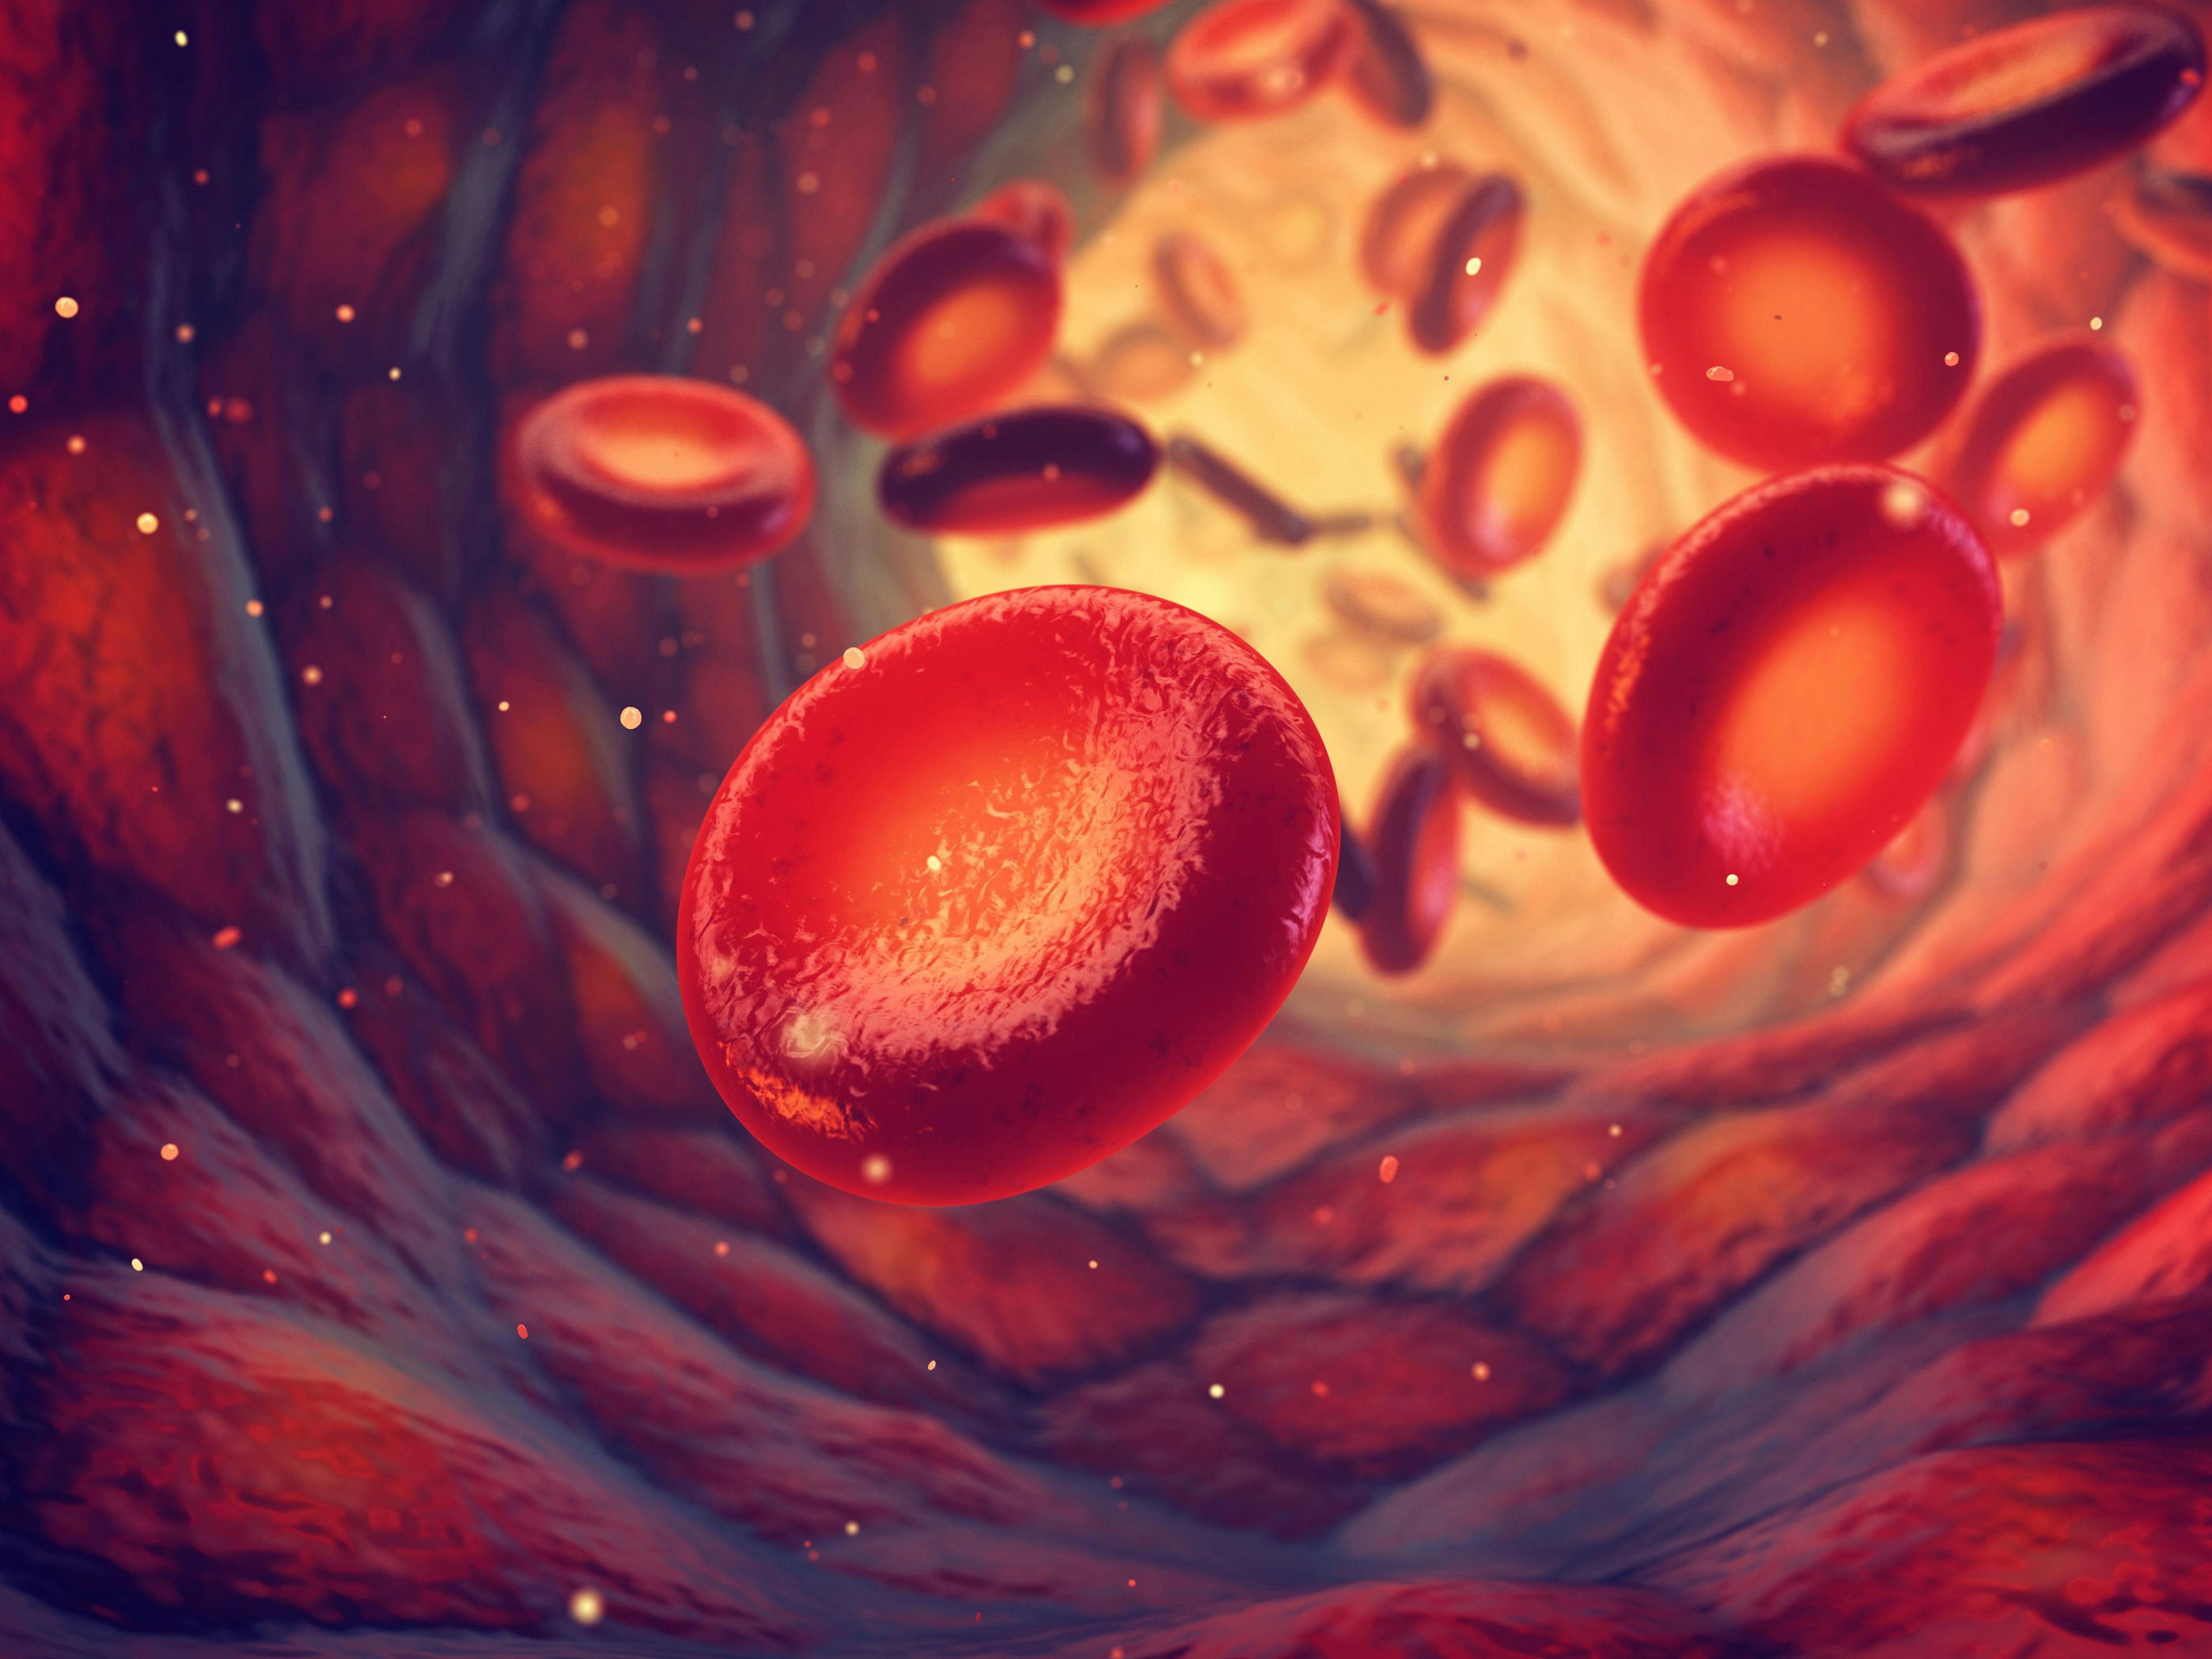 Low Platelet Count Observed in Treatment Associated With Myelofibrosis